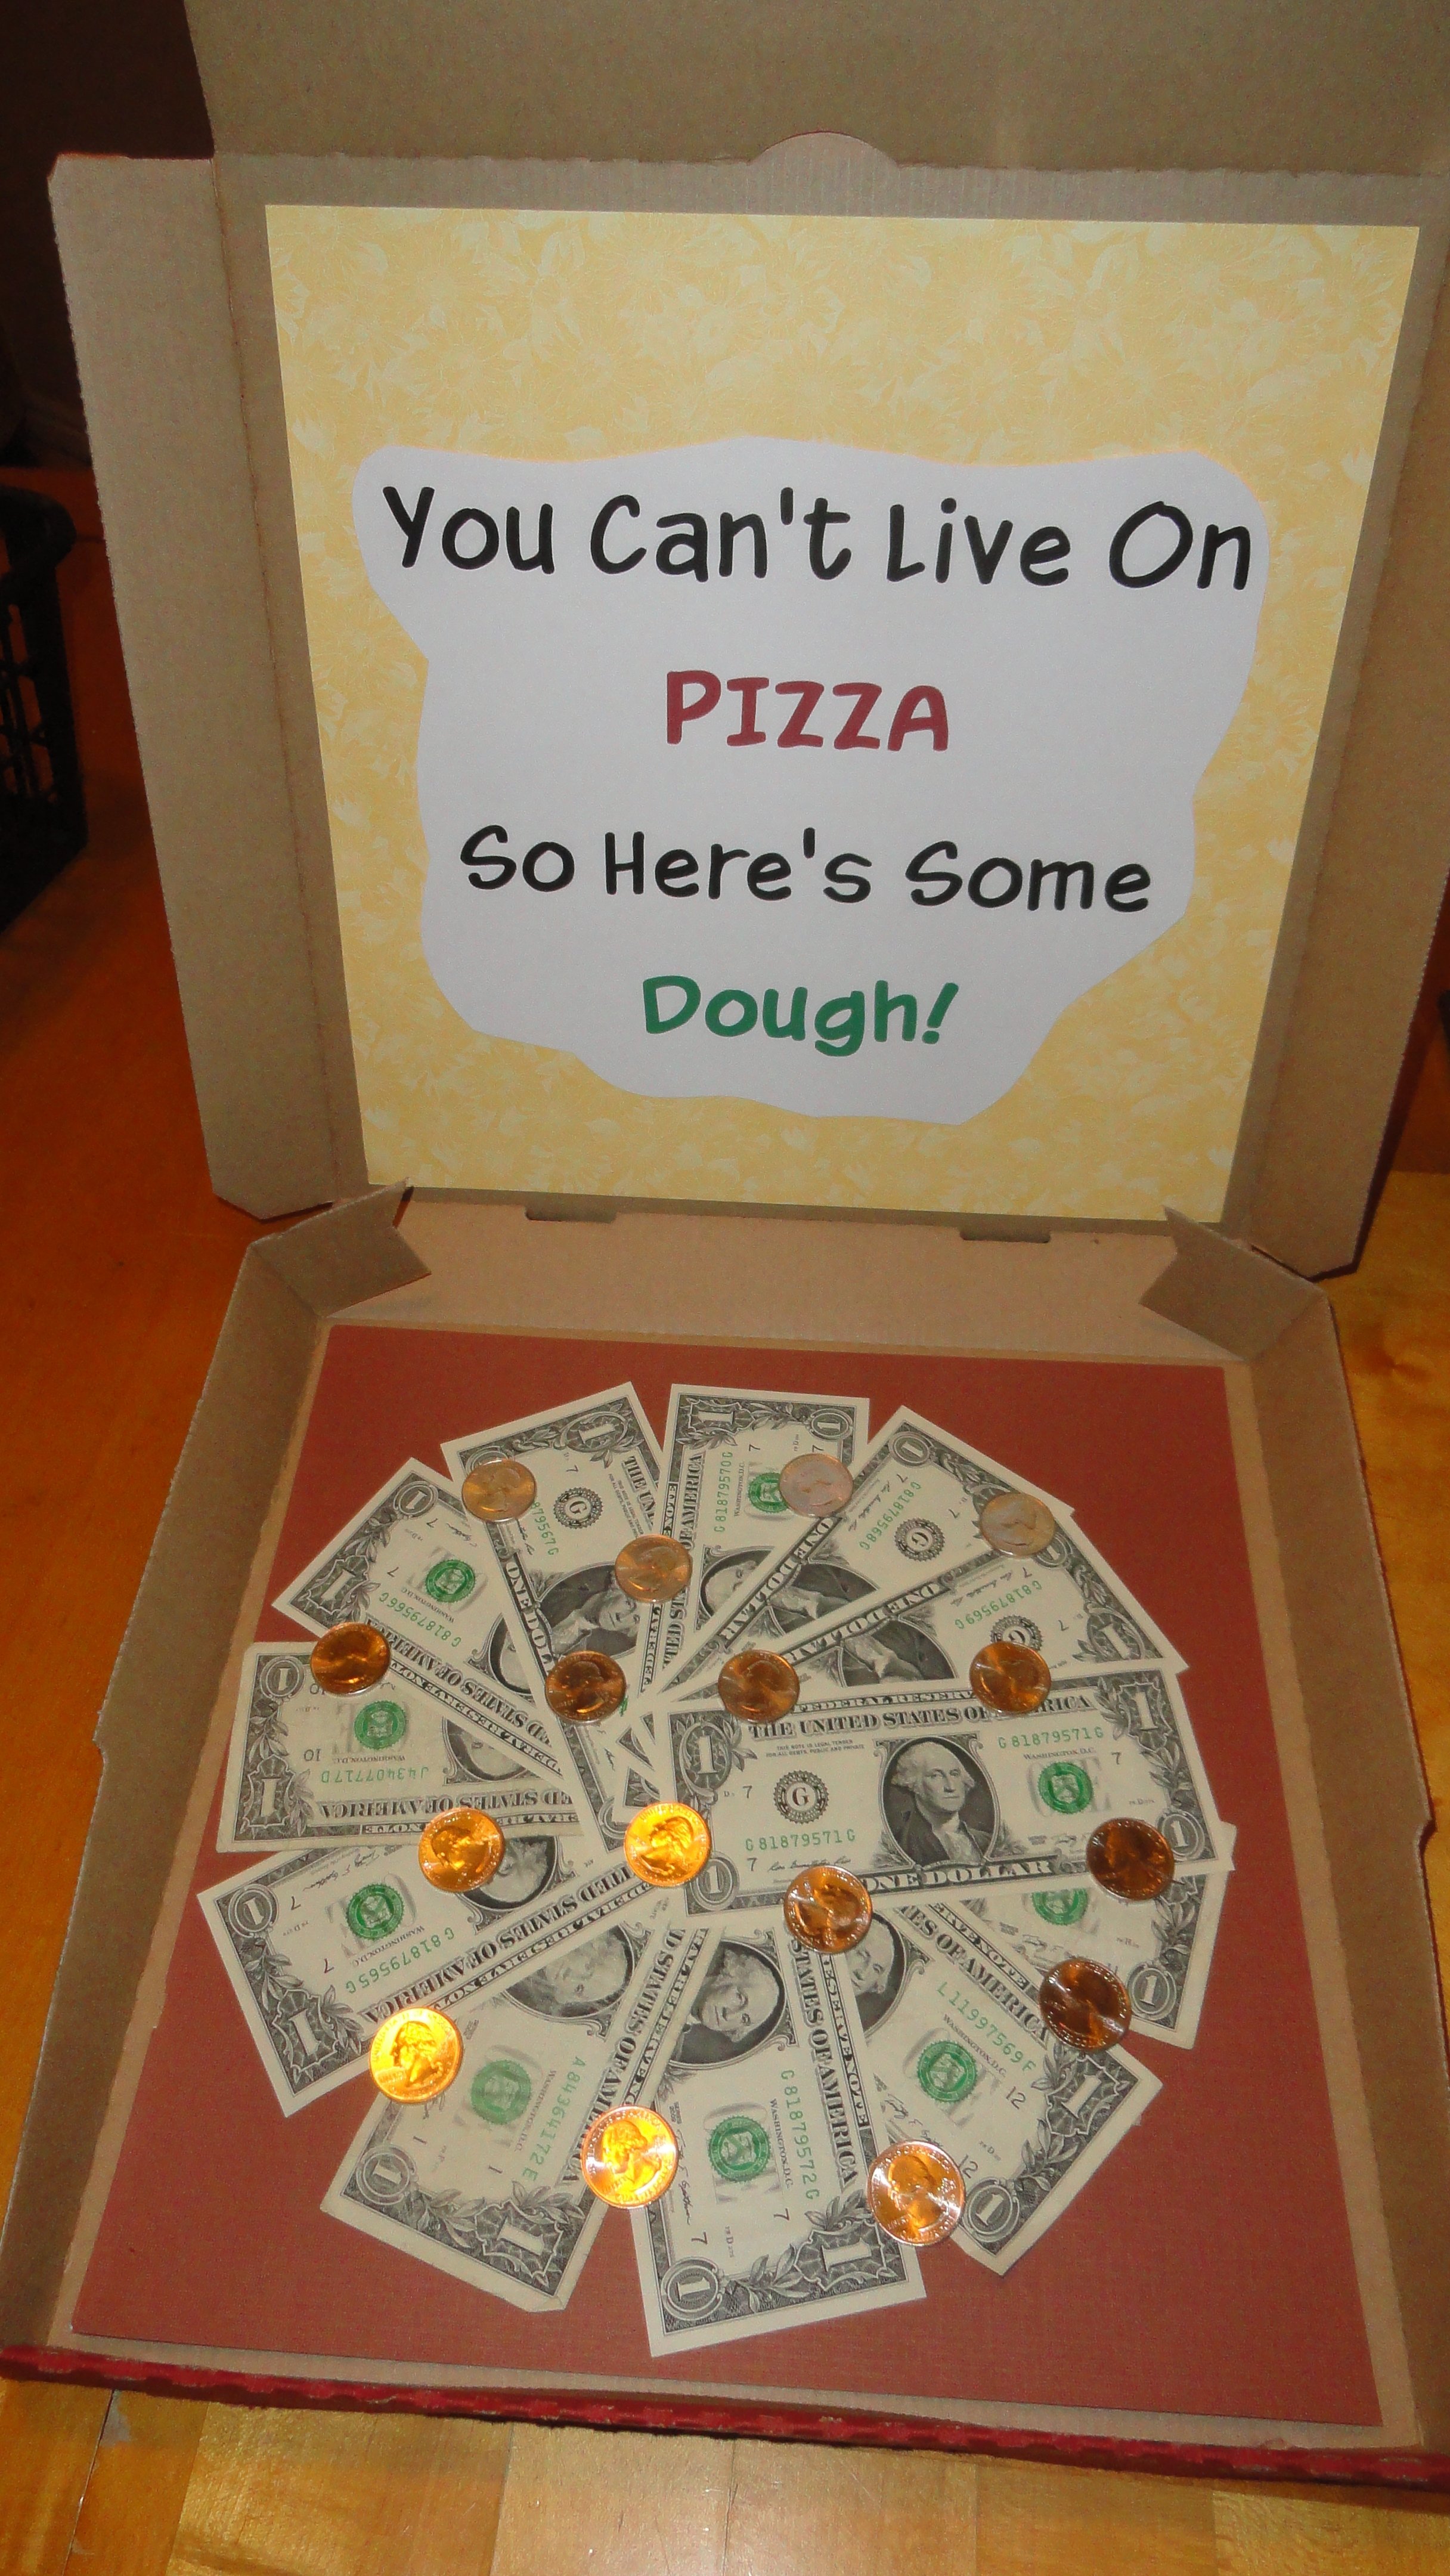 10 Great White Elephant Gift Ideas For Work money pizza white elephant or gift how cool is it to open a pizza 3 2022